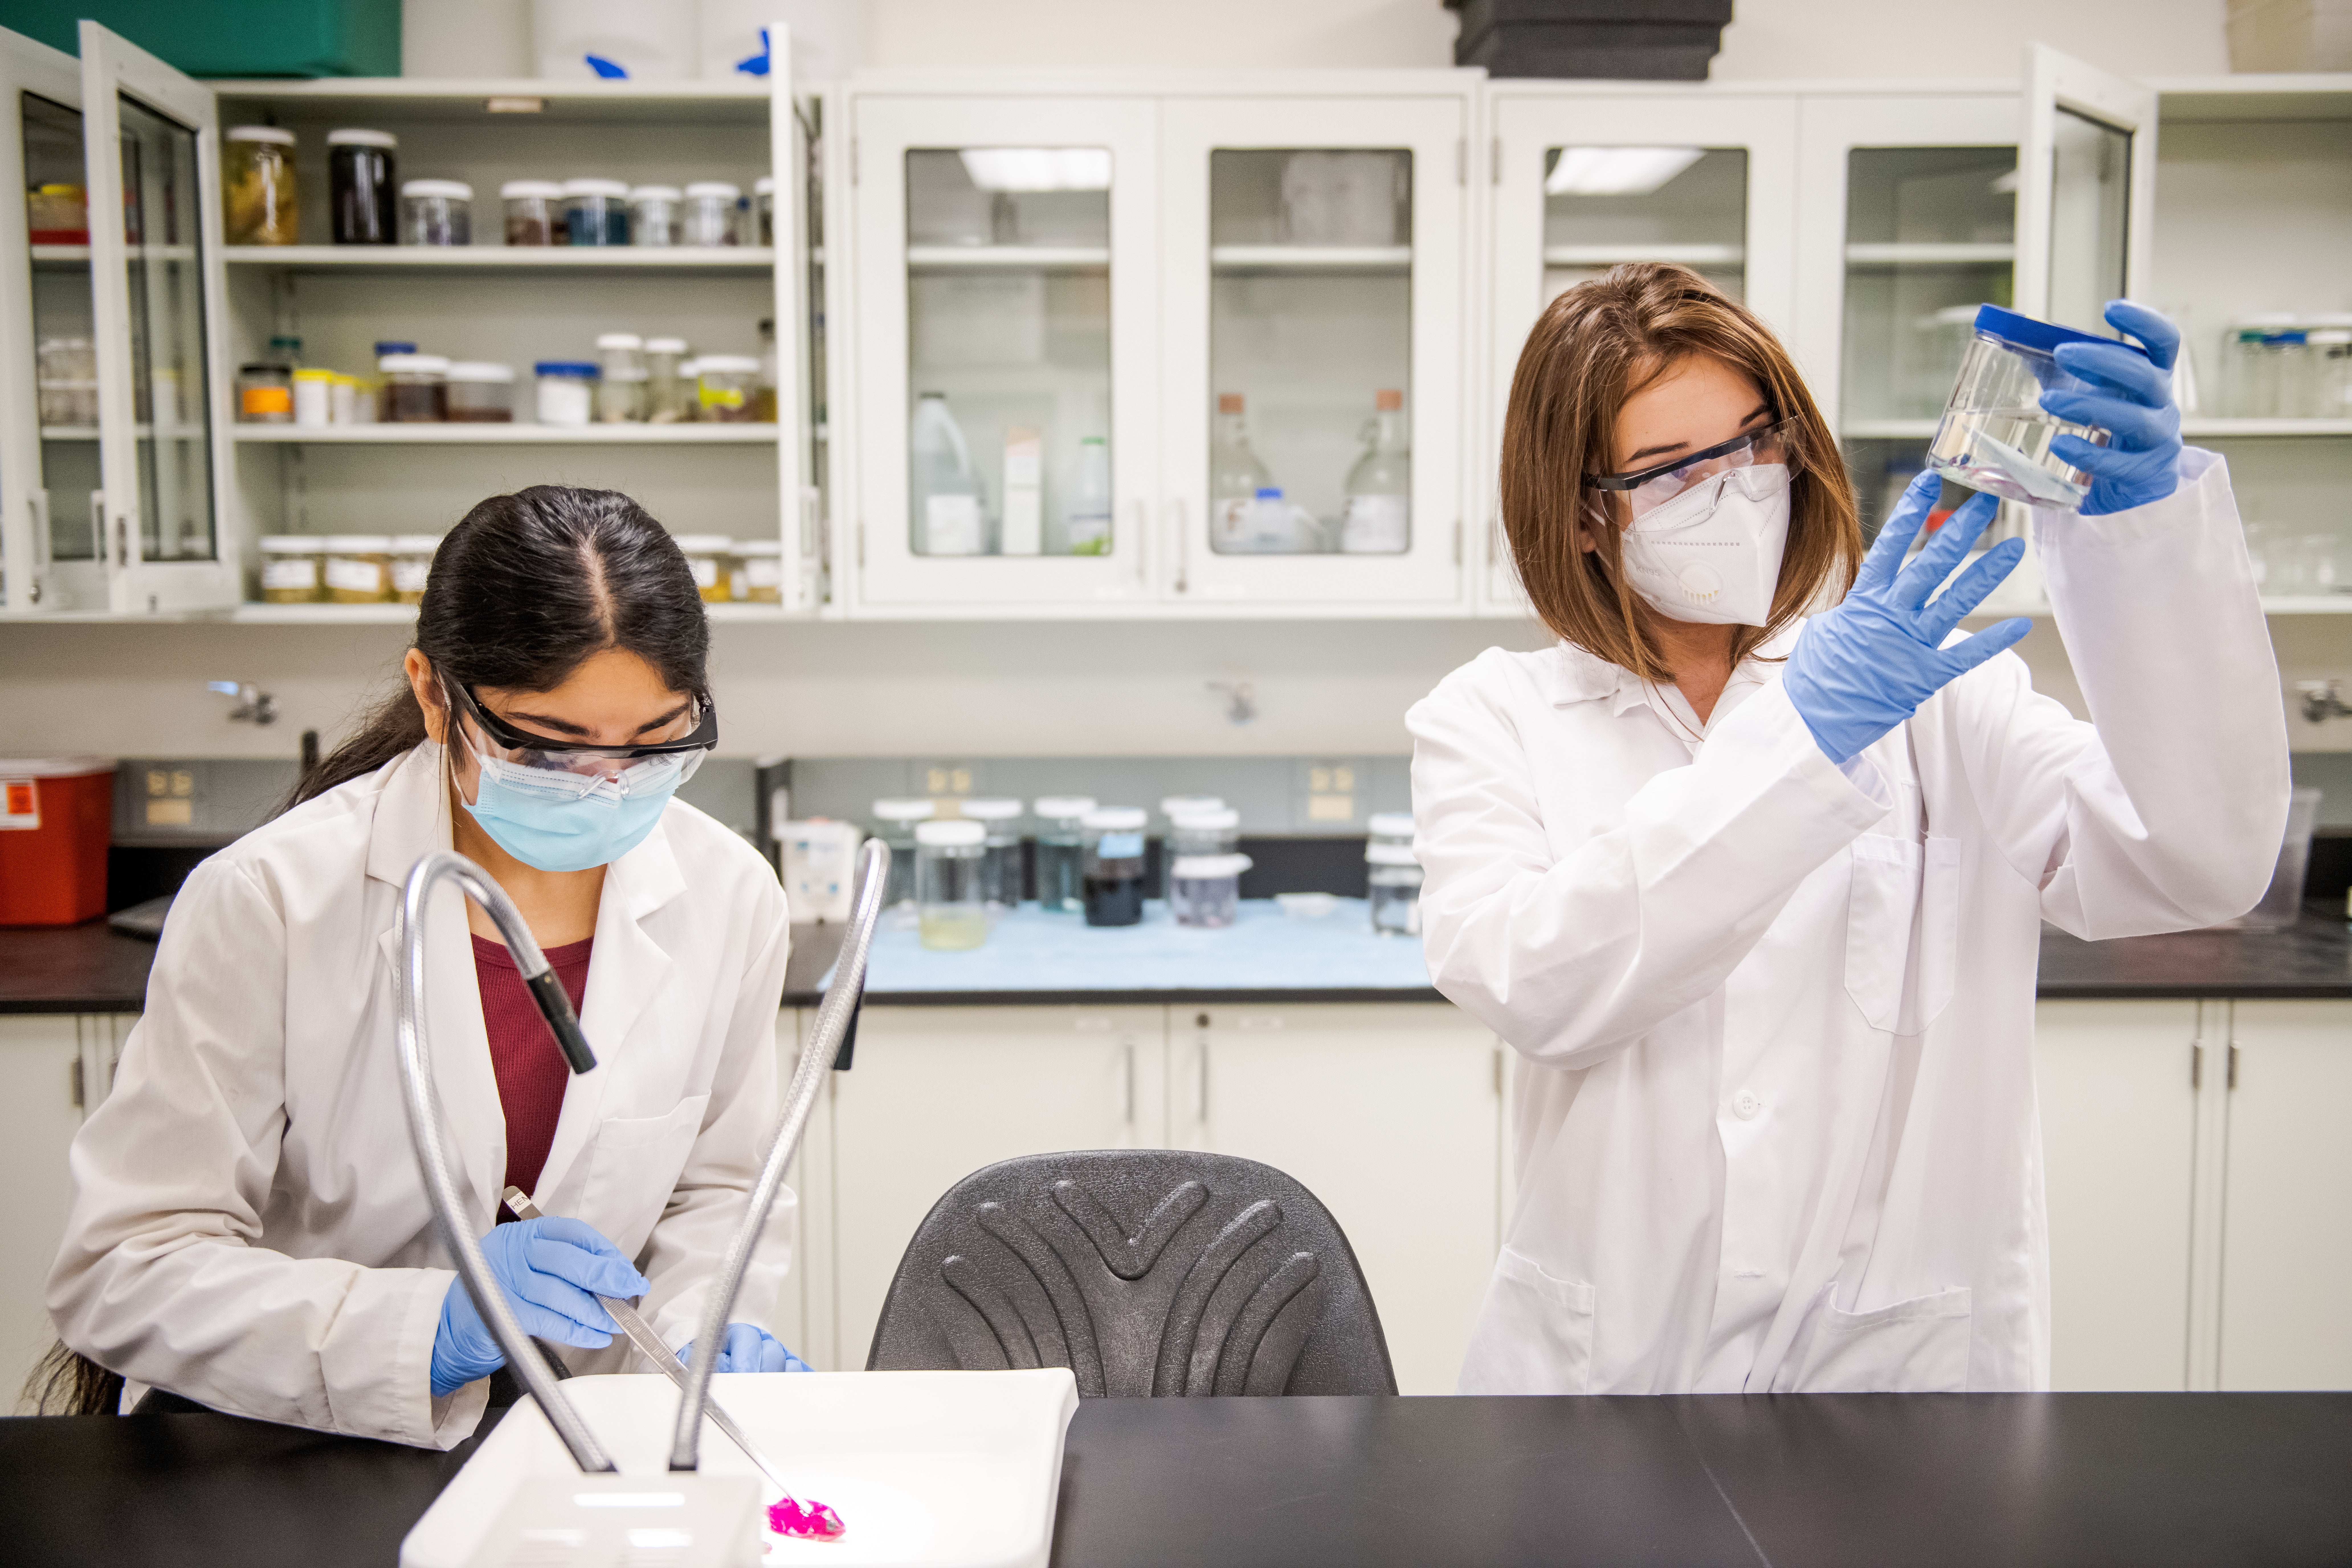 Image of ASU students in lab